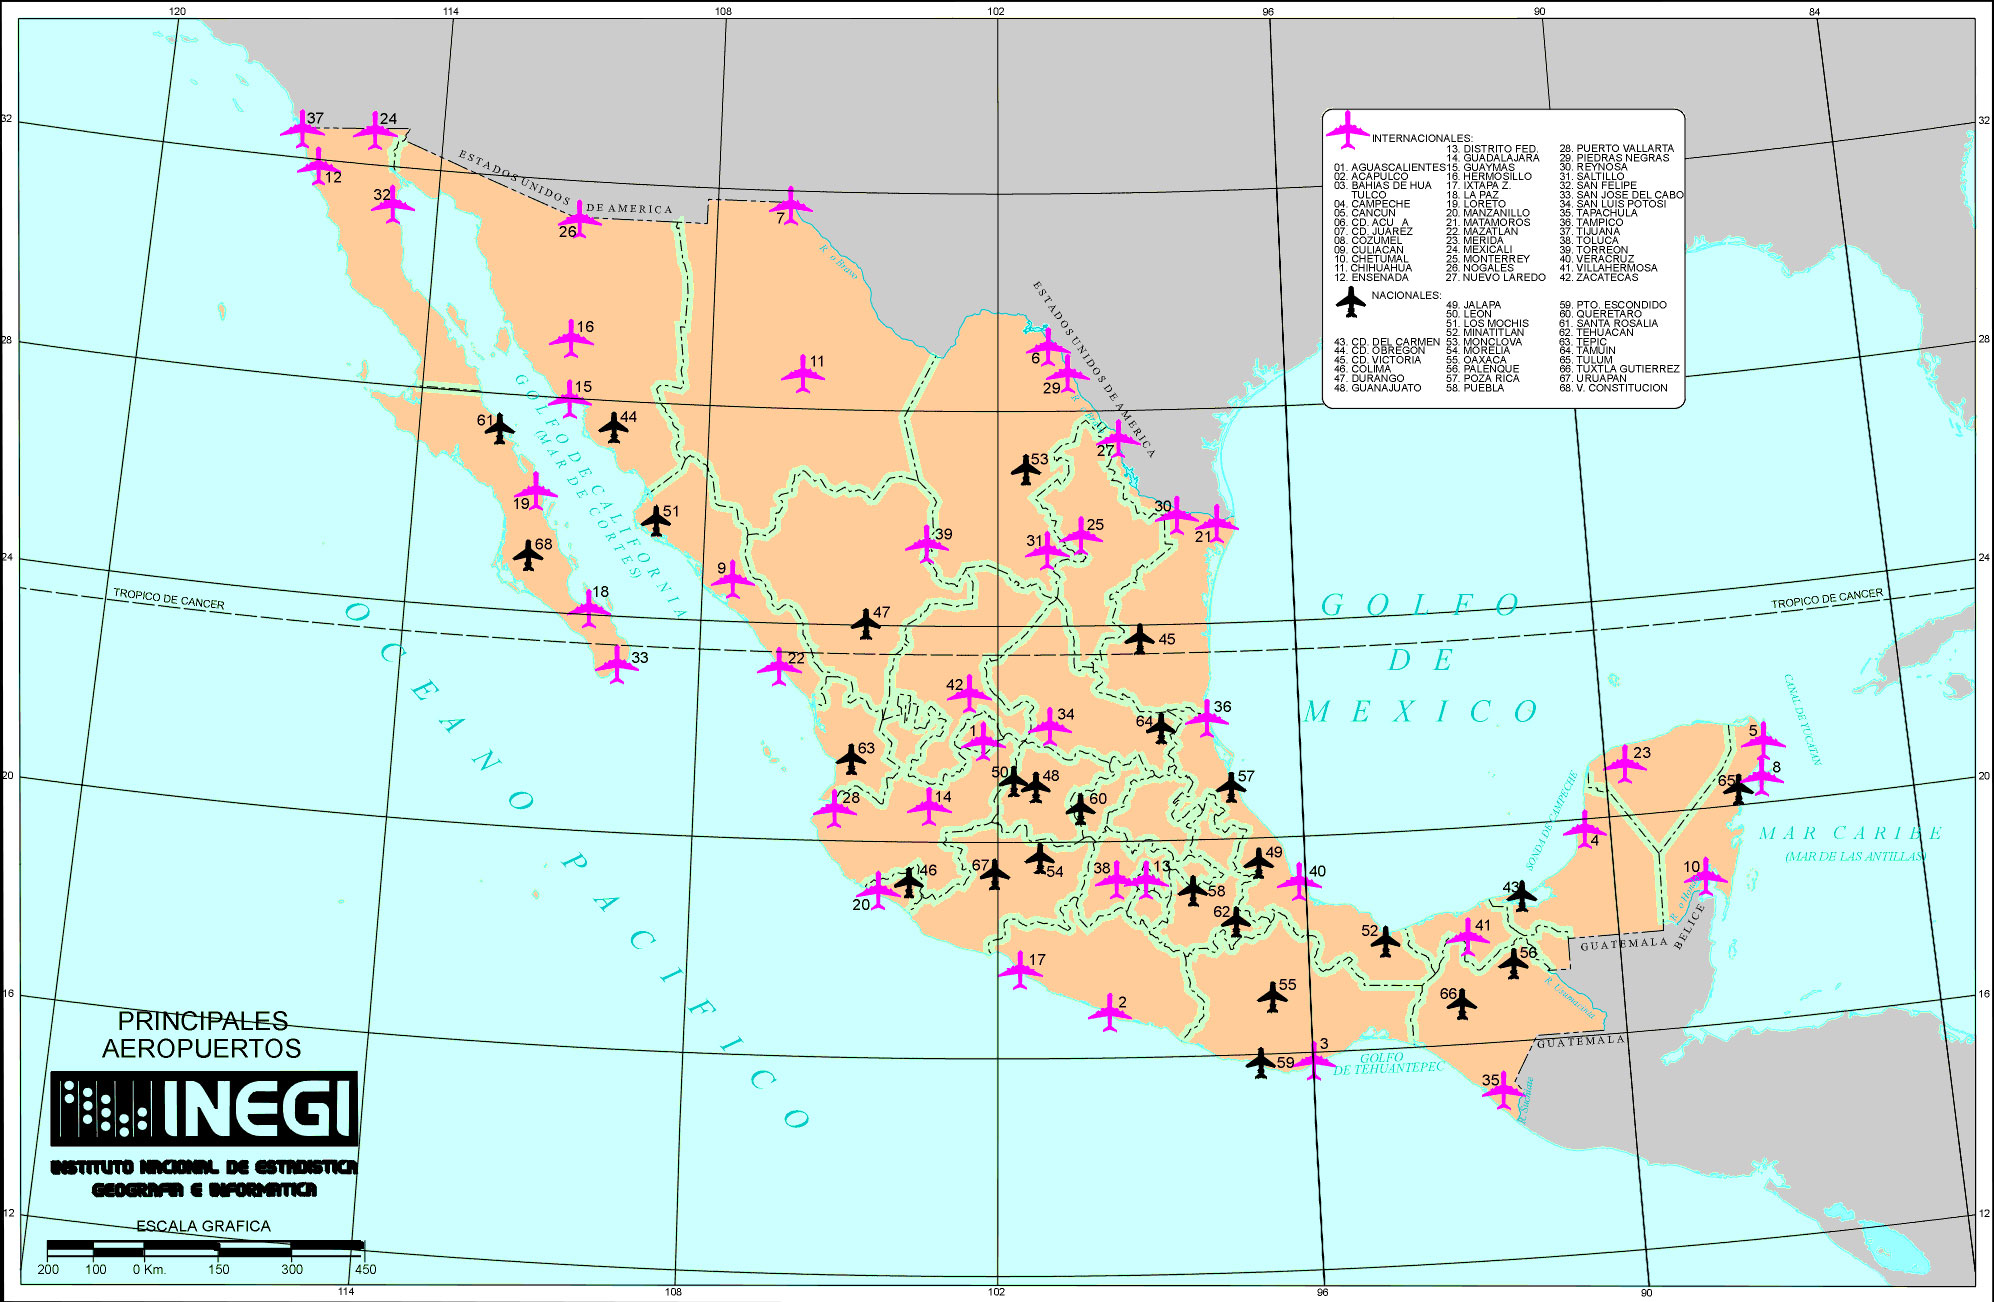 Airports in Mexico and Baja California